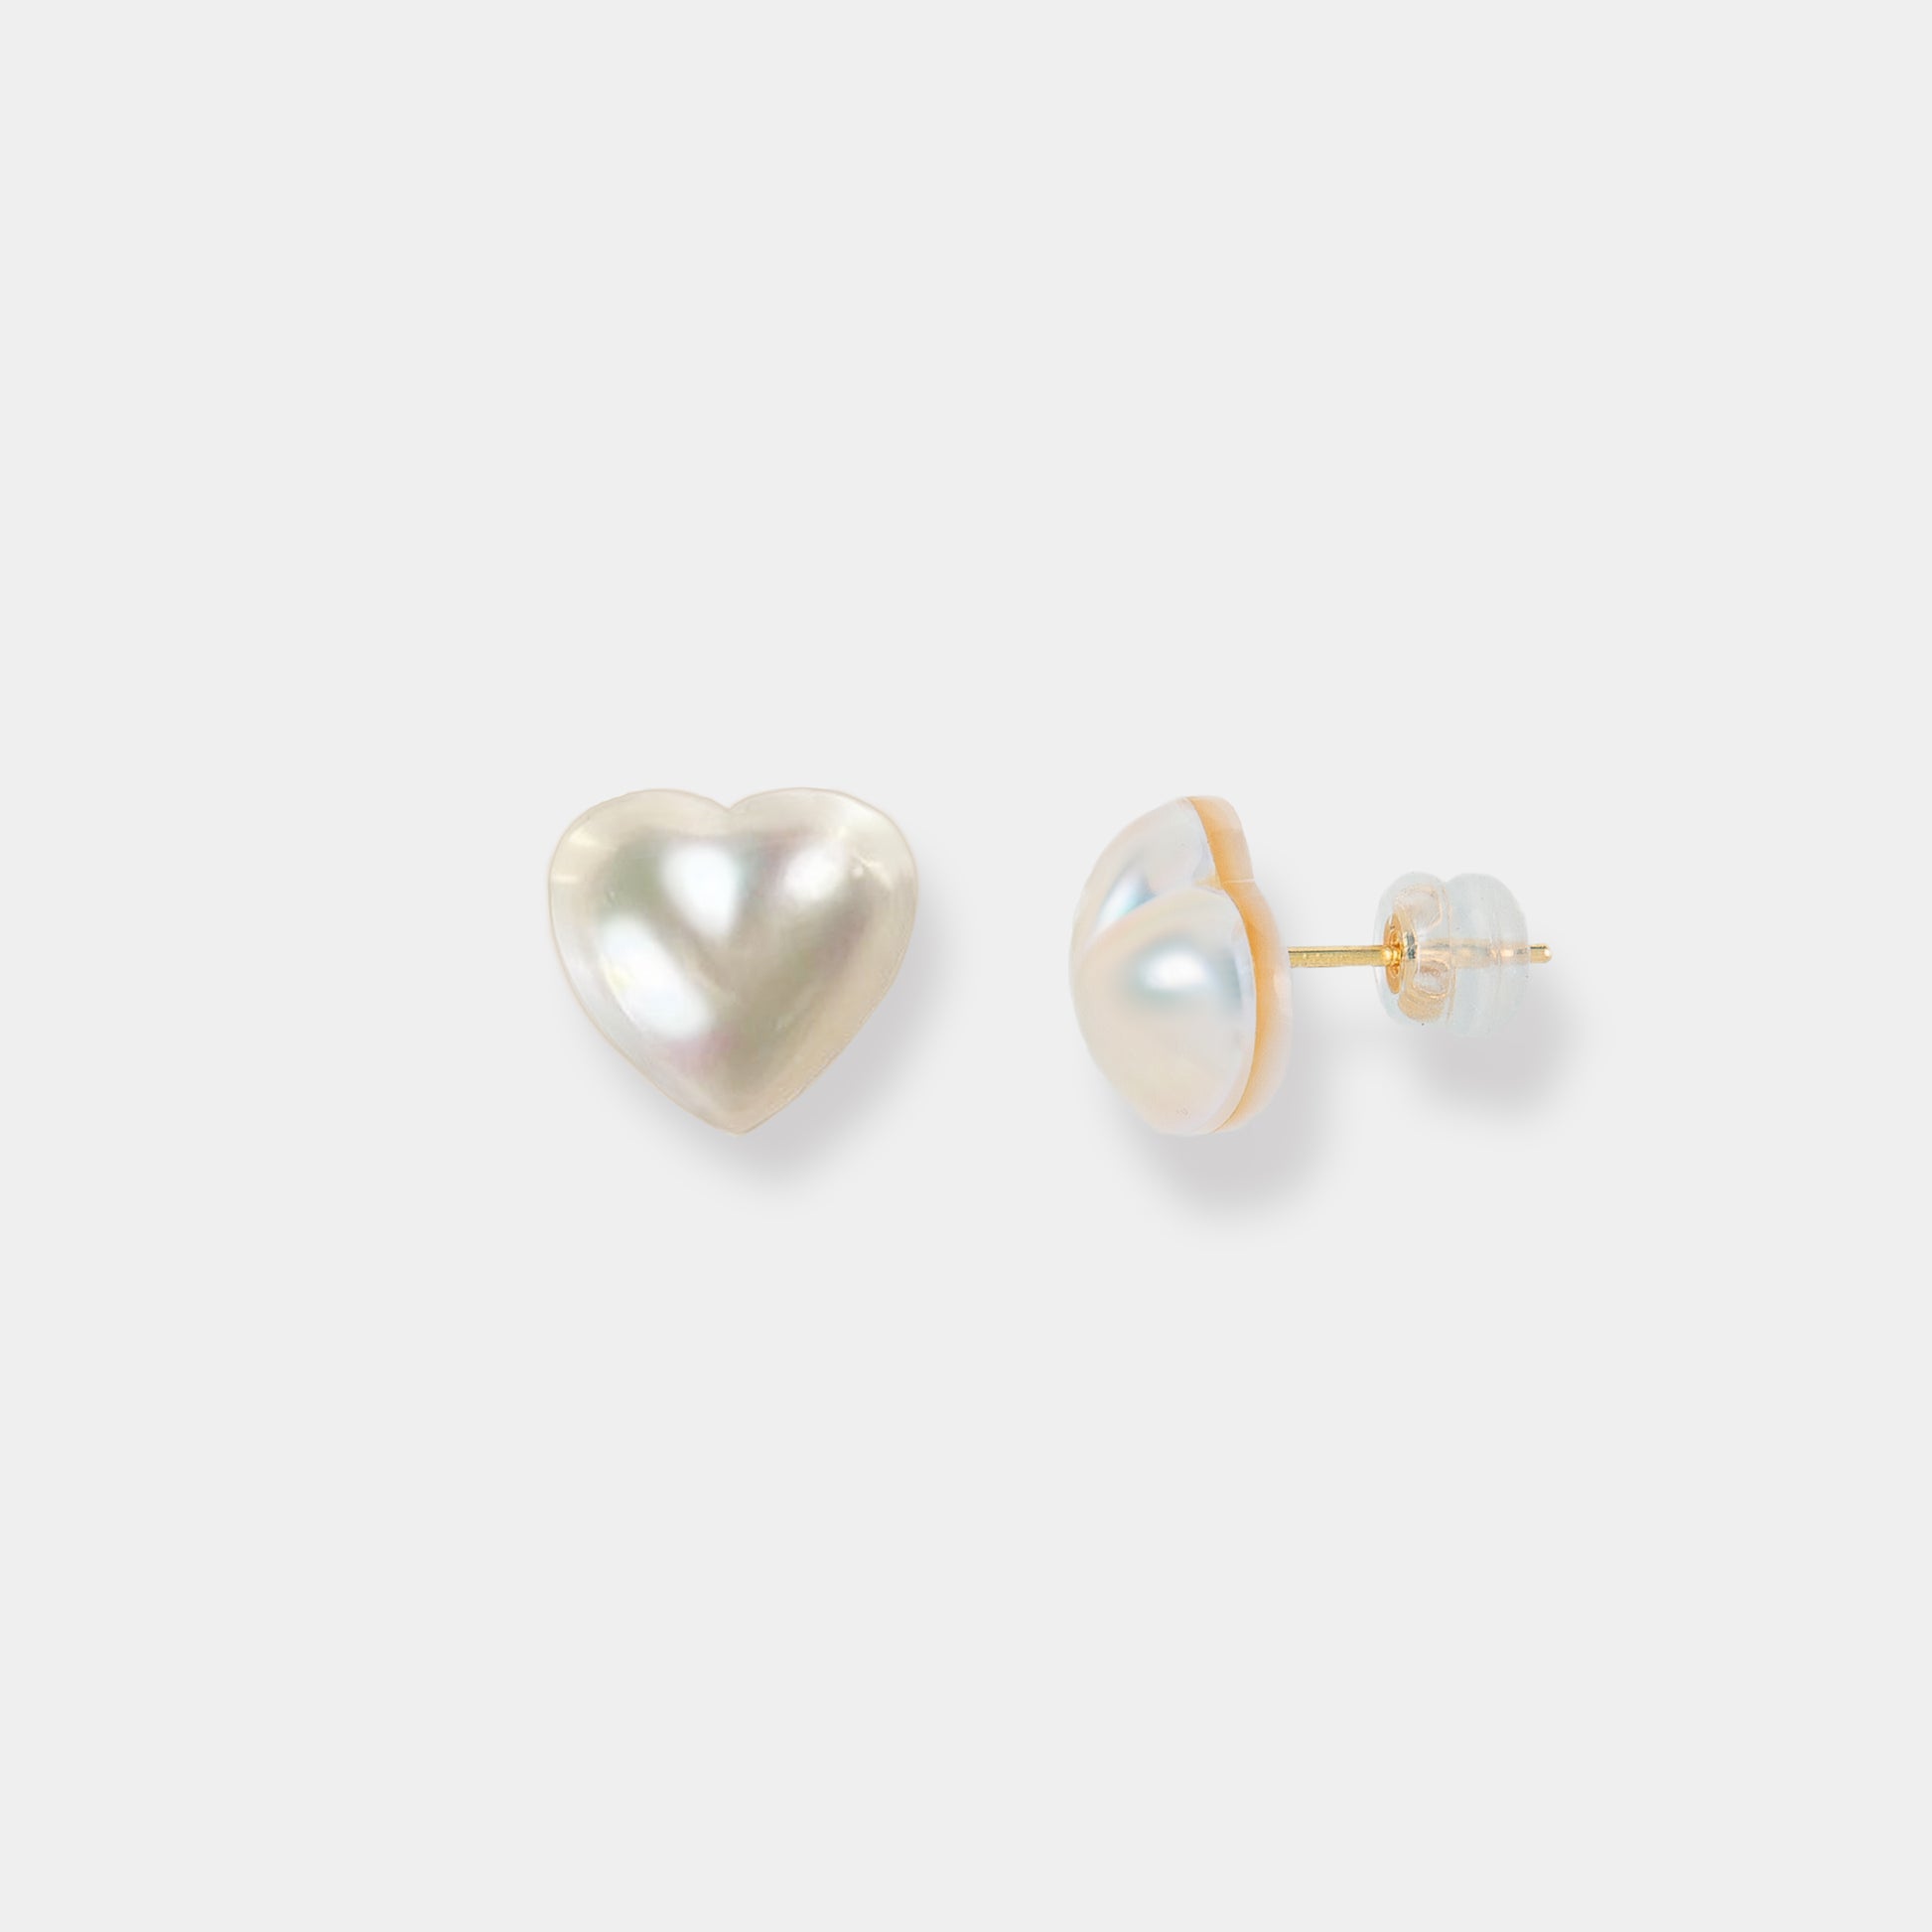 Elevate your style with these stunning white heart-shaped pearl stud earrings. A timeless accessory that adds a touch of sophistication.